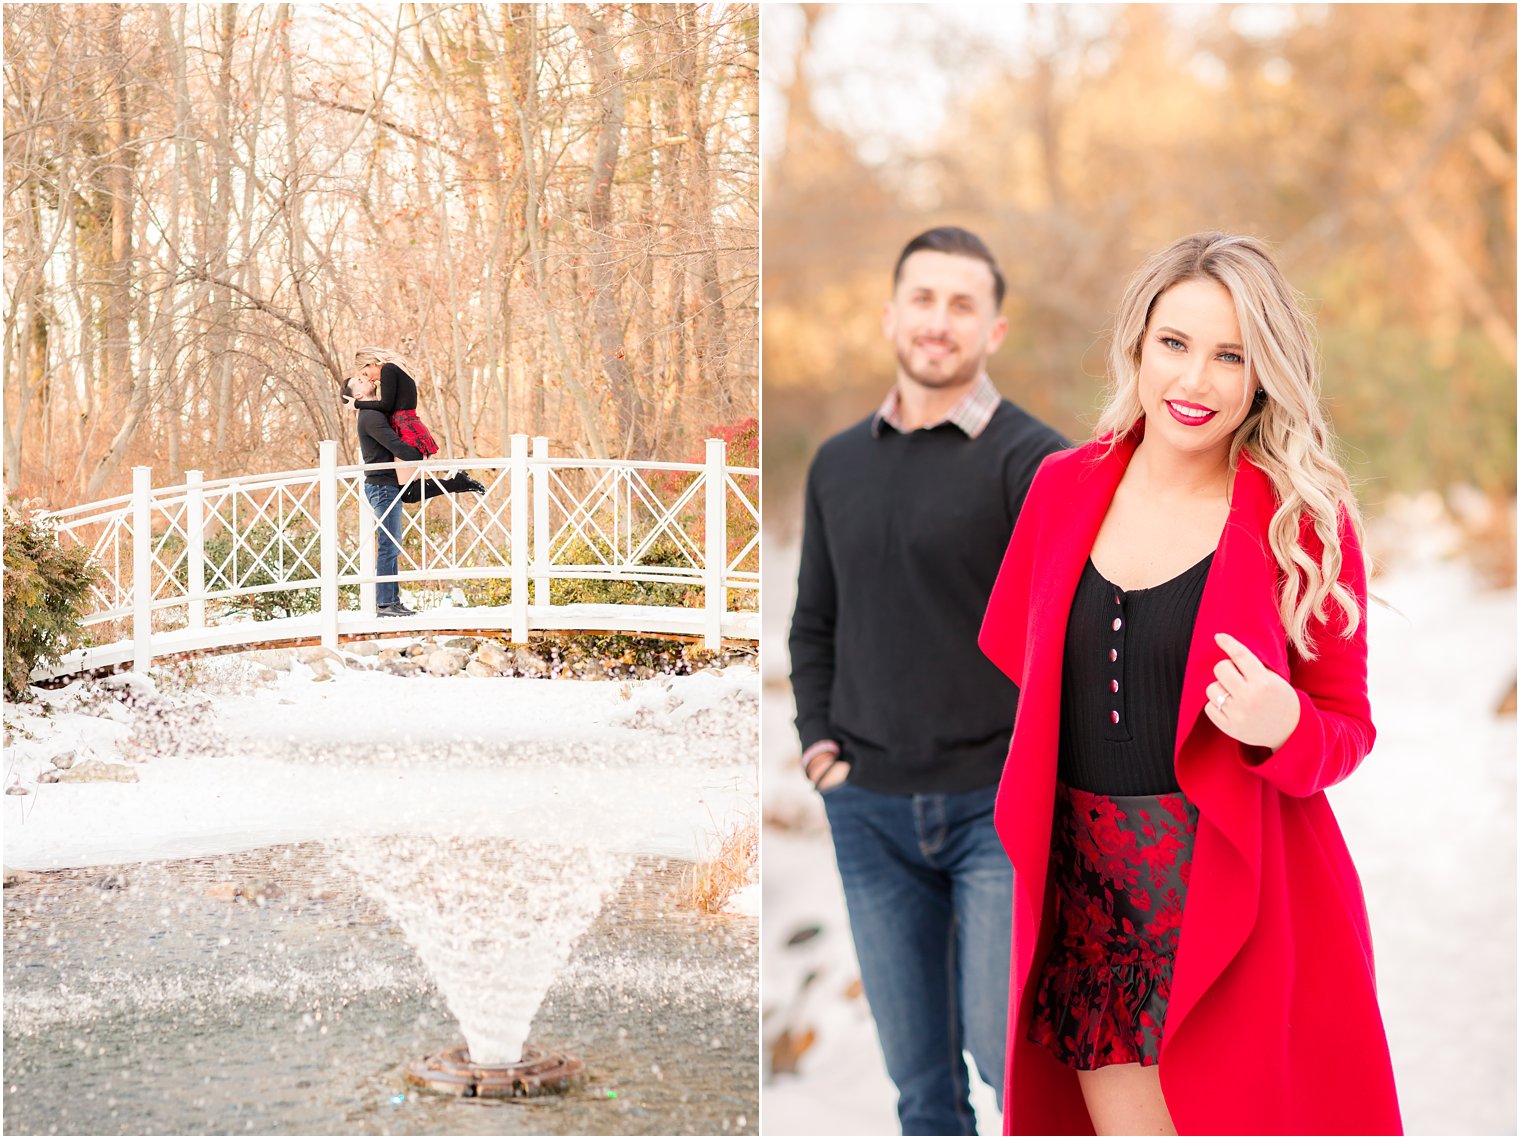 Engaged couple wearing red and black outfits